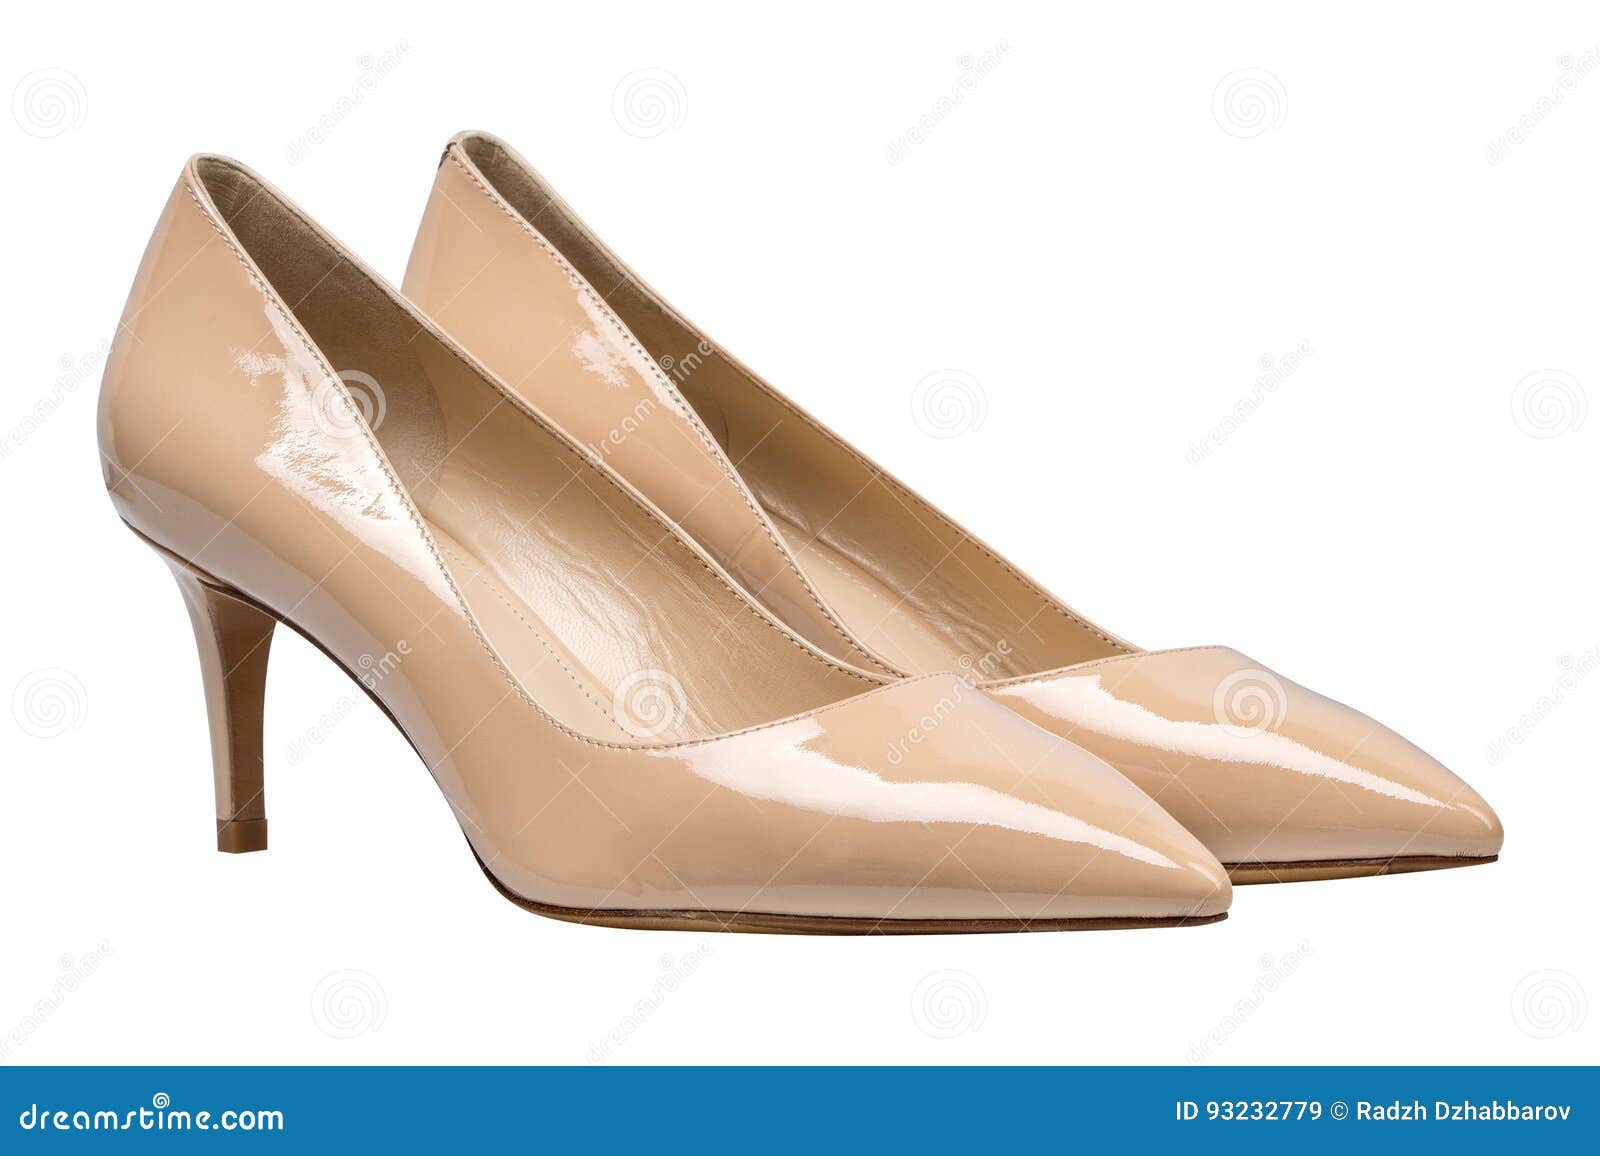 Women Beige Lacquered Glossy Shoes Stock Image - Image of business ...